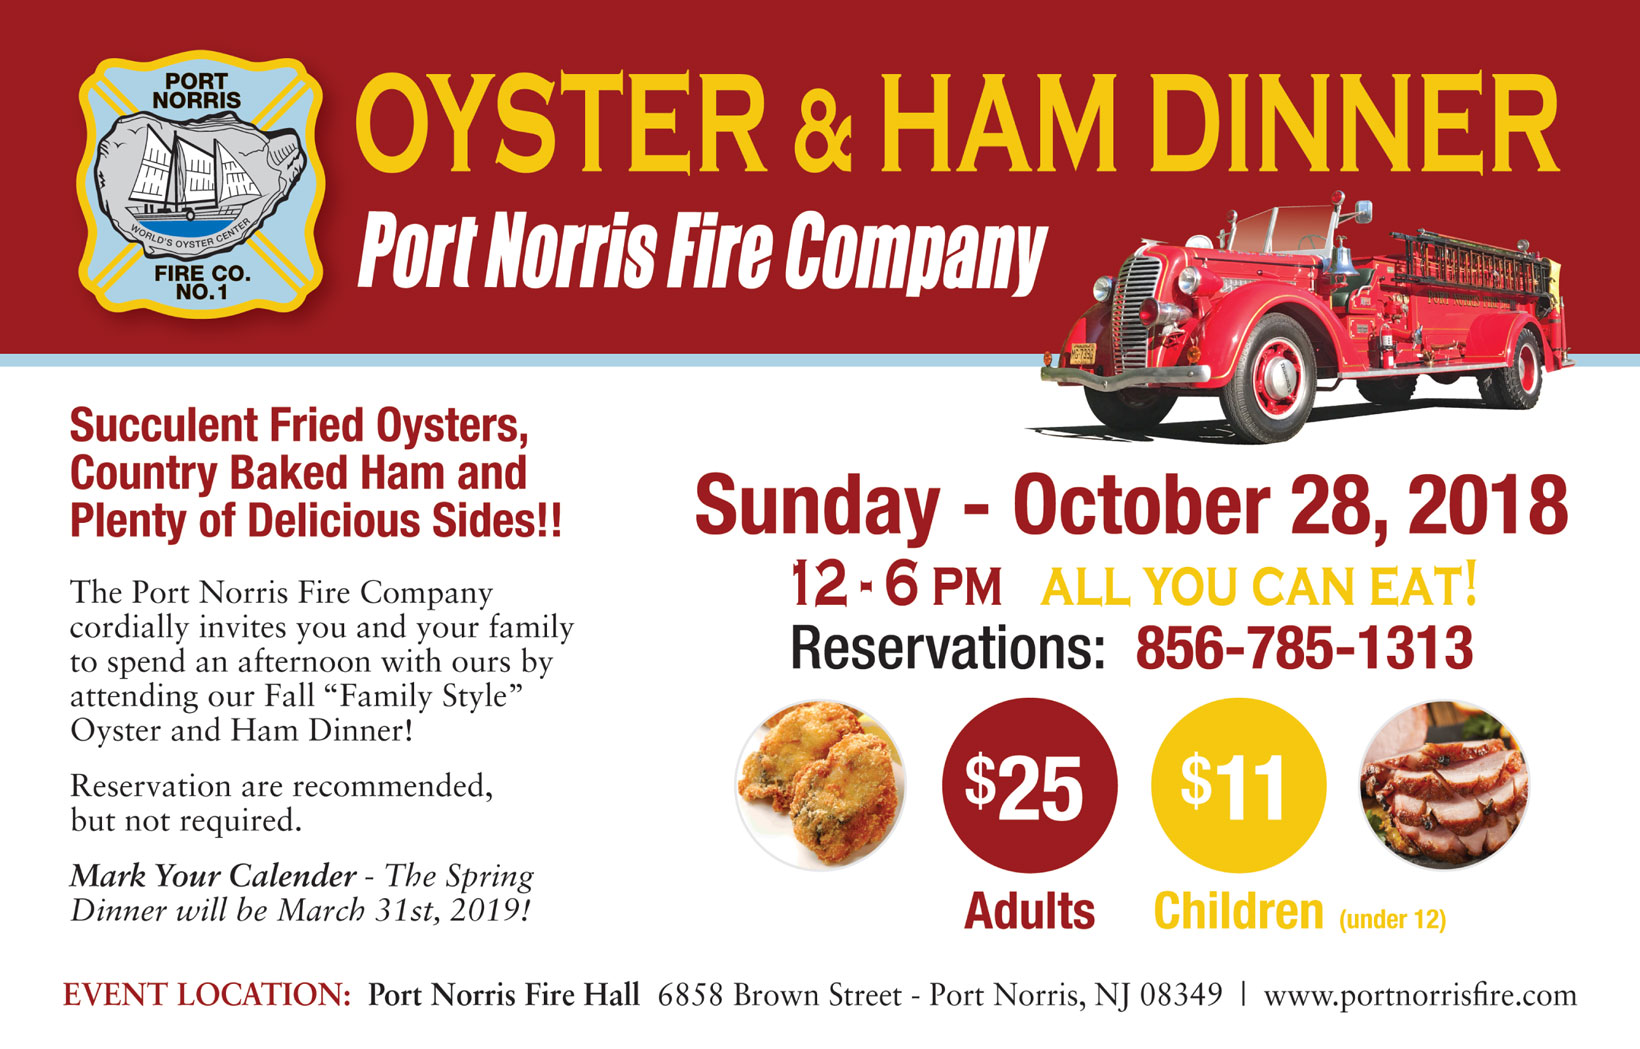 The Port Norris Fire Company Family Style Oyster & Ham Dinner